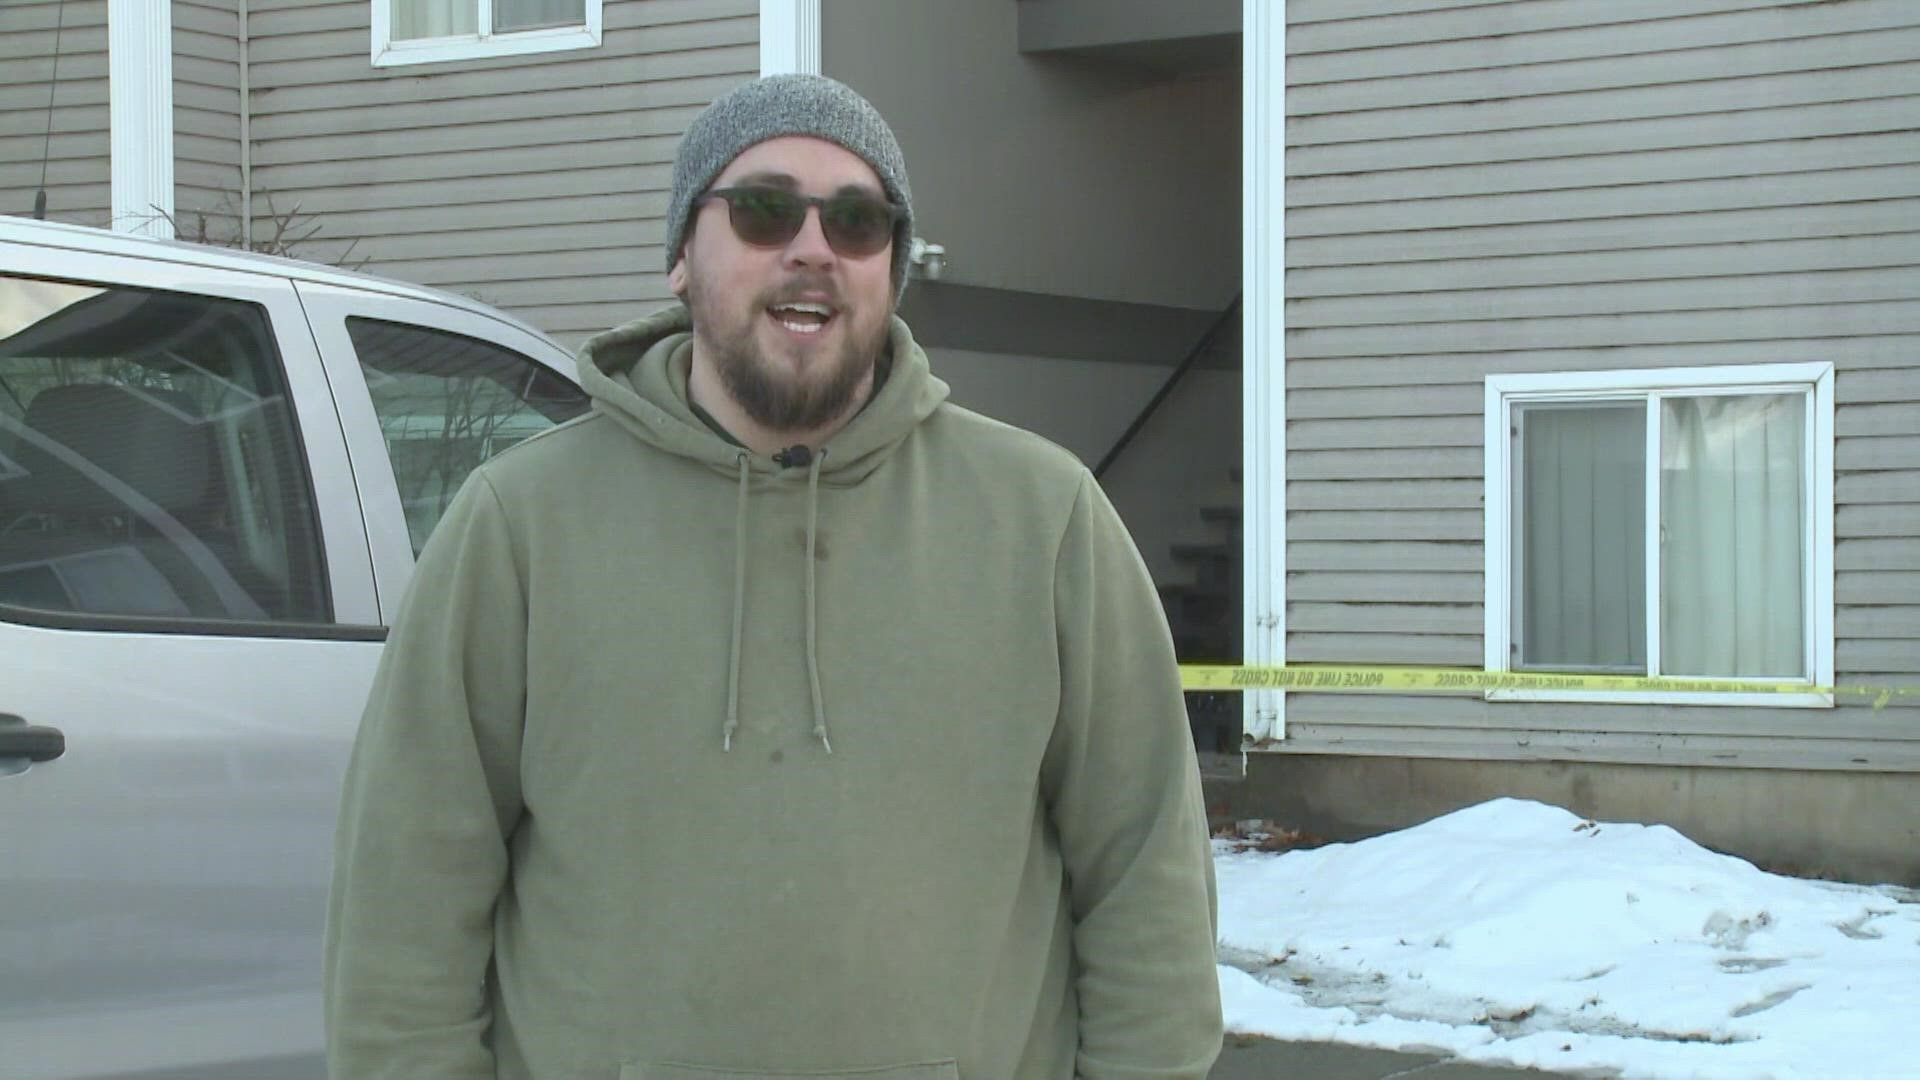 Nephi Duff lives in the same apartment complex as the suspect in Pullman, Washington.